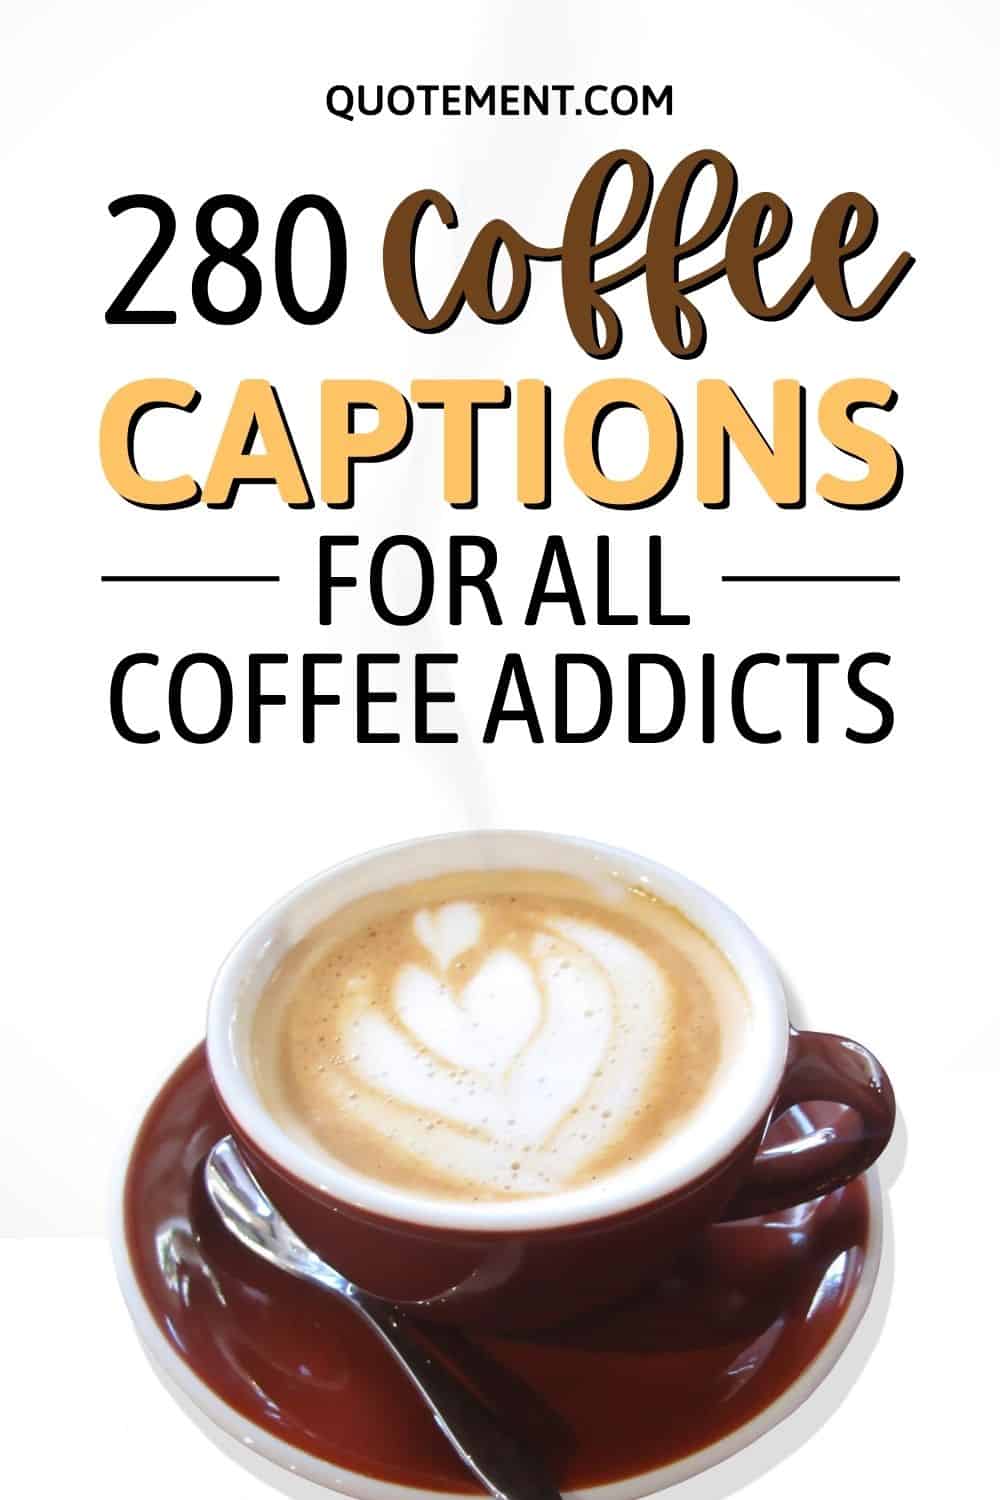 280 Awesome Coffee Captions To Show Your Coffee Obsession